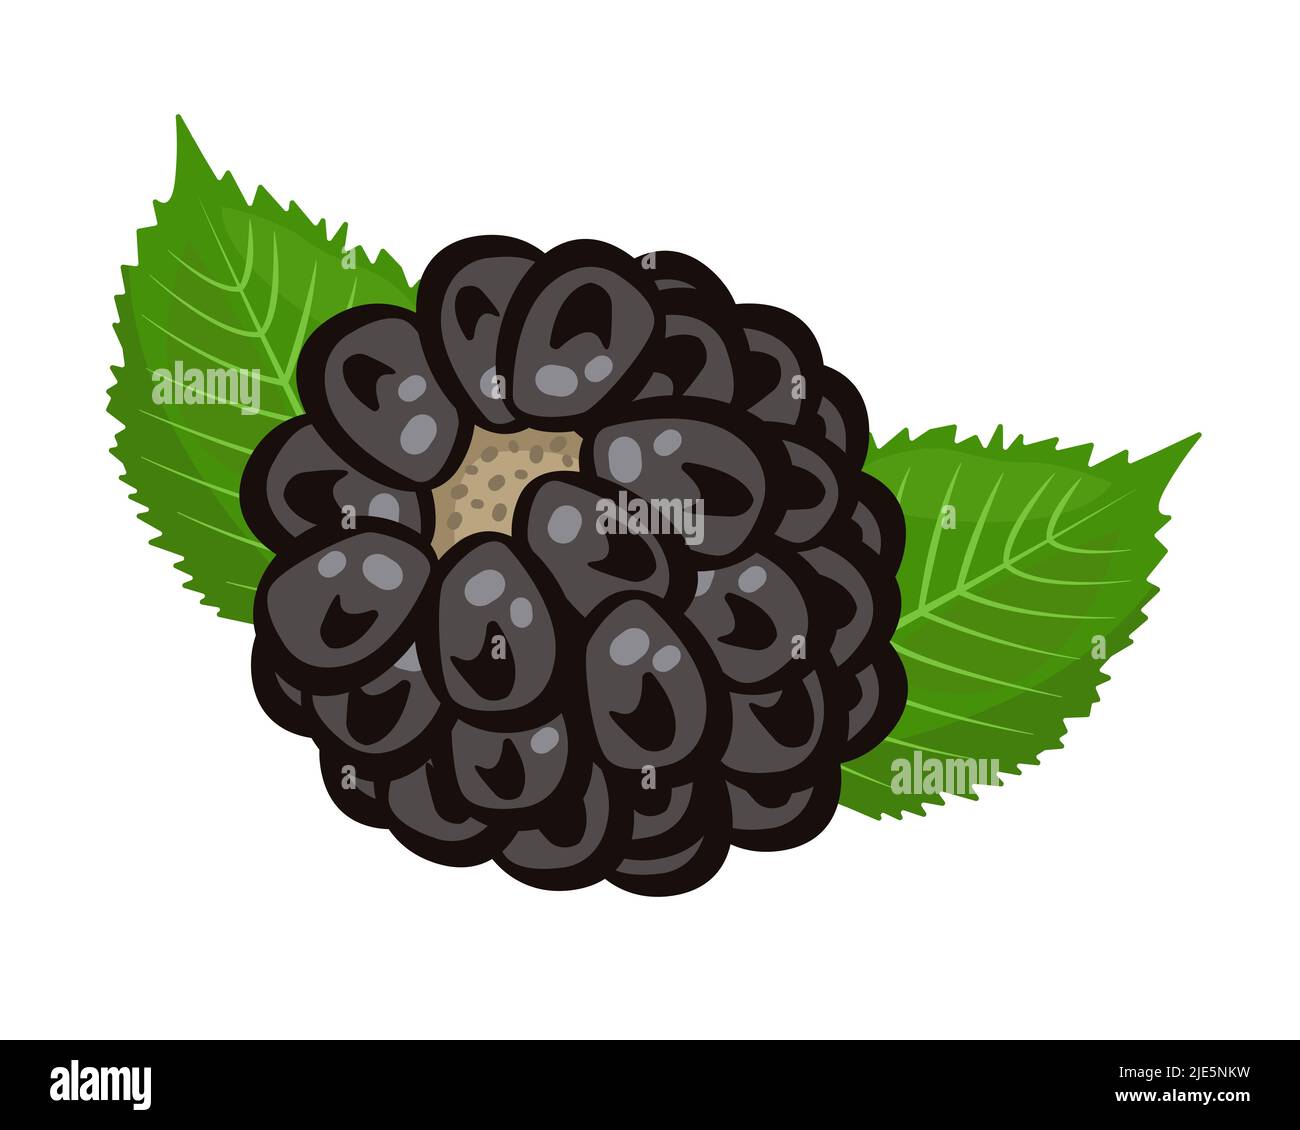 Single blackberry with two leaves, colorful illustration Stock Vector